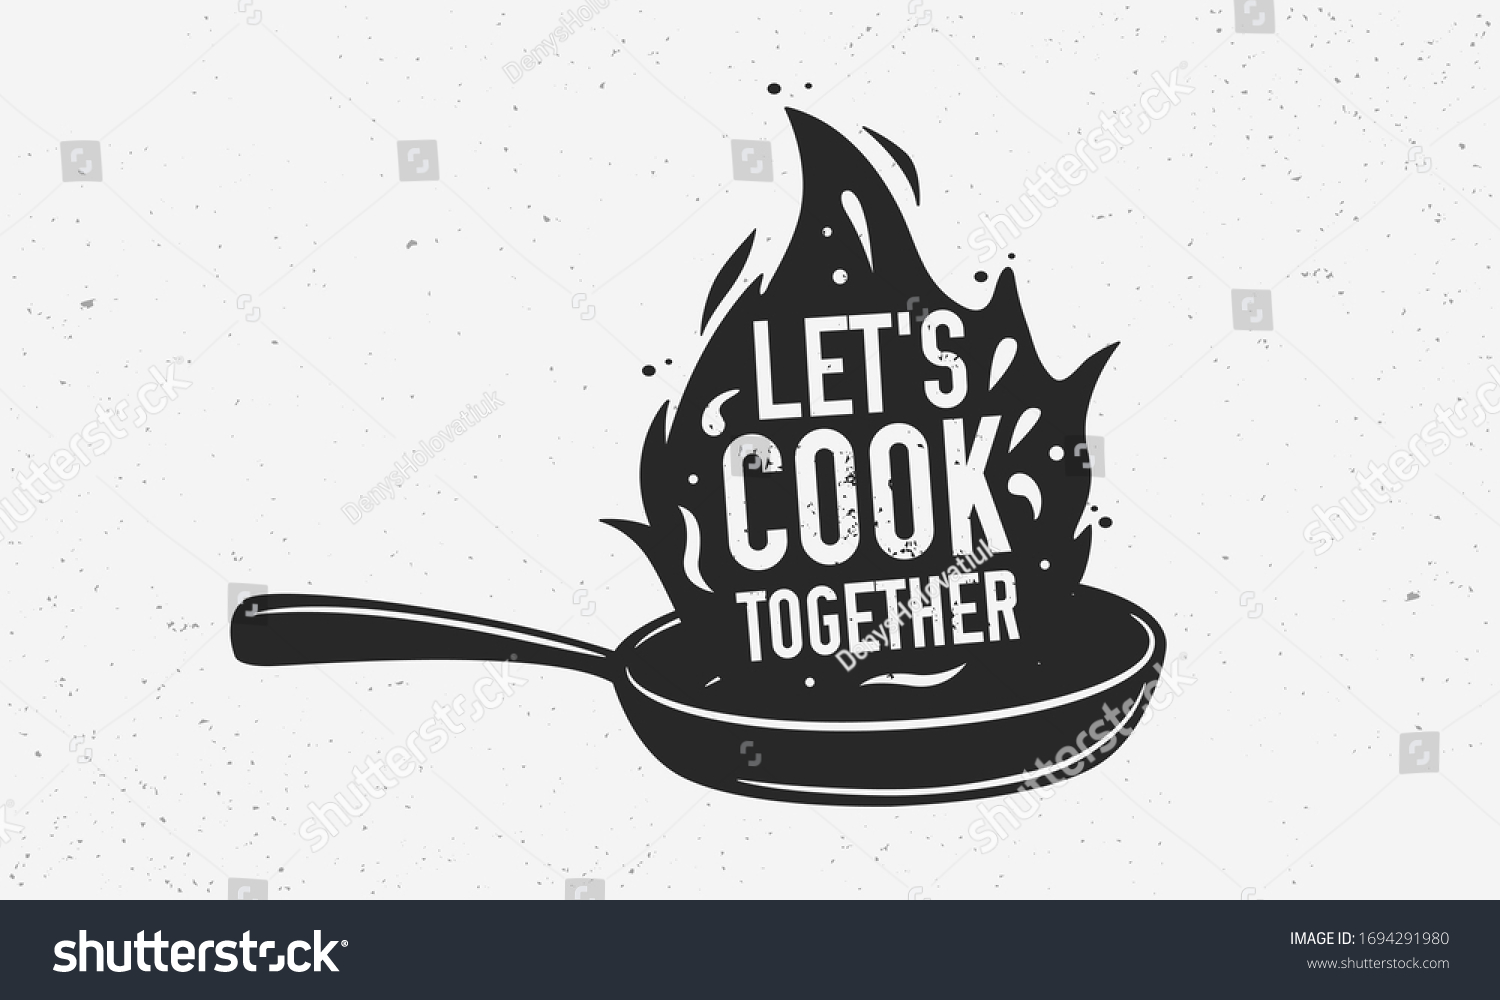 Let's Cook Together with frying pan - Vintage poster, logo. Cooking poster with cooking pan, fire flame and grunge texture. Trendy retro design for Culinary school, food studio, cooking classes. Vector illustration #1694291980